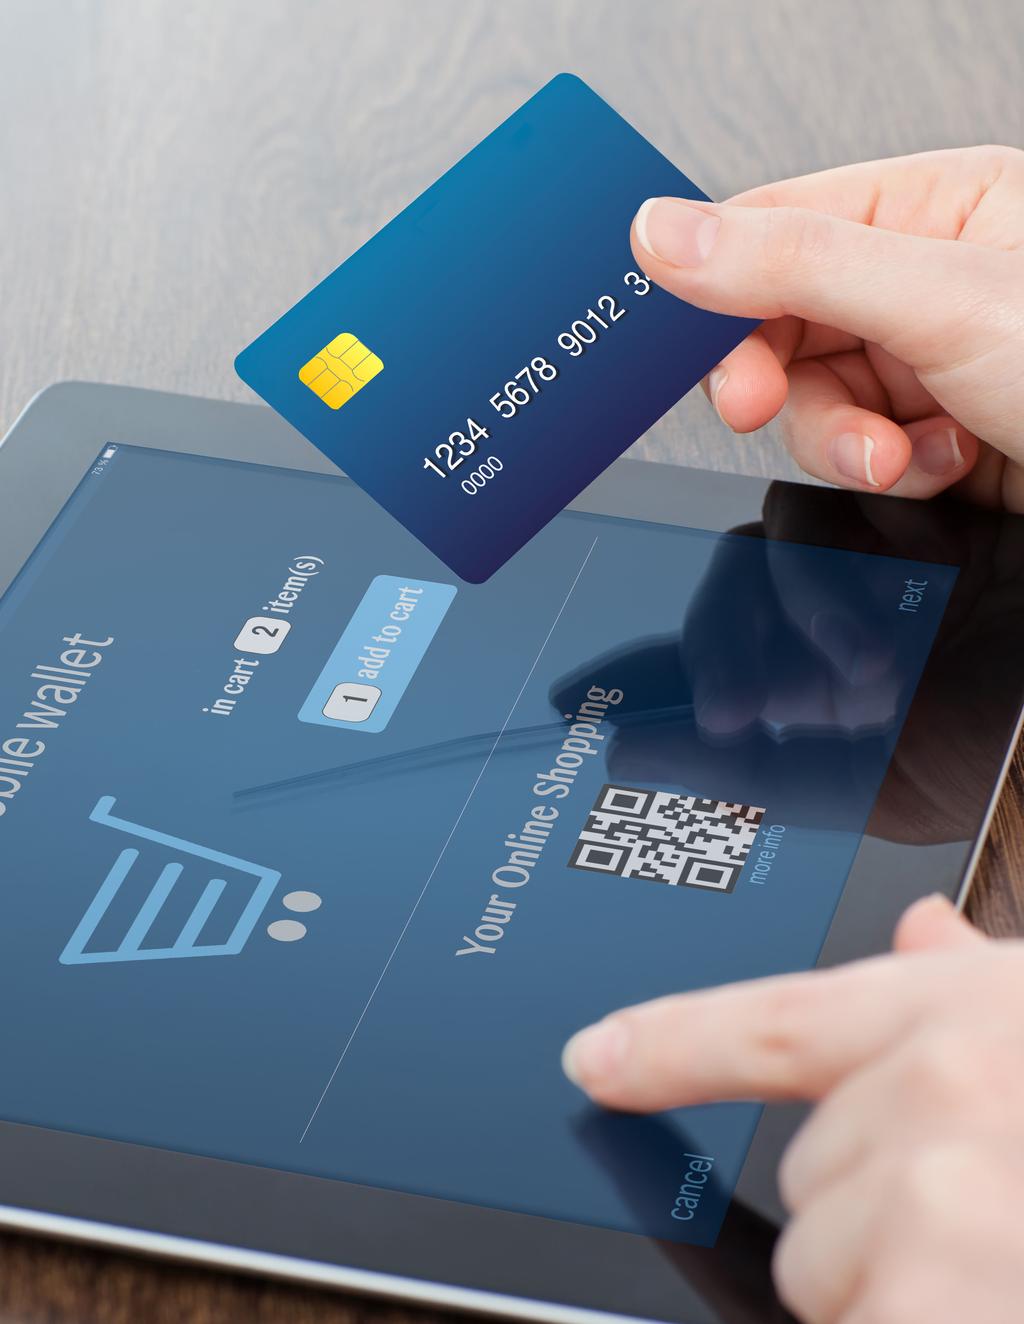 KEY INSIGHT ABOUT PAYMENT PREFERENCES: Offering credit card payment options will greatly improve